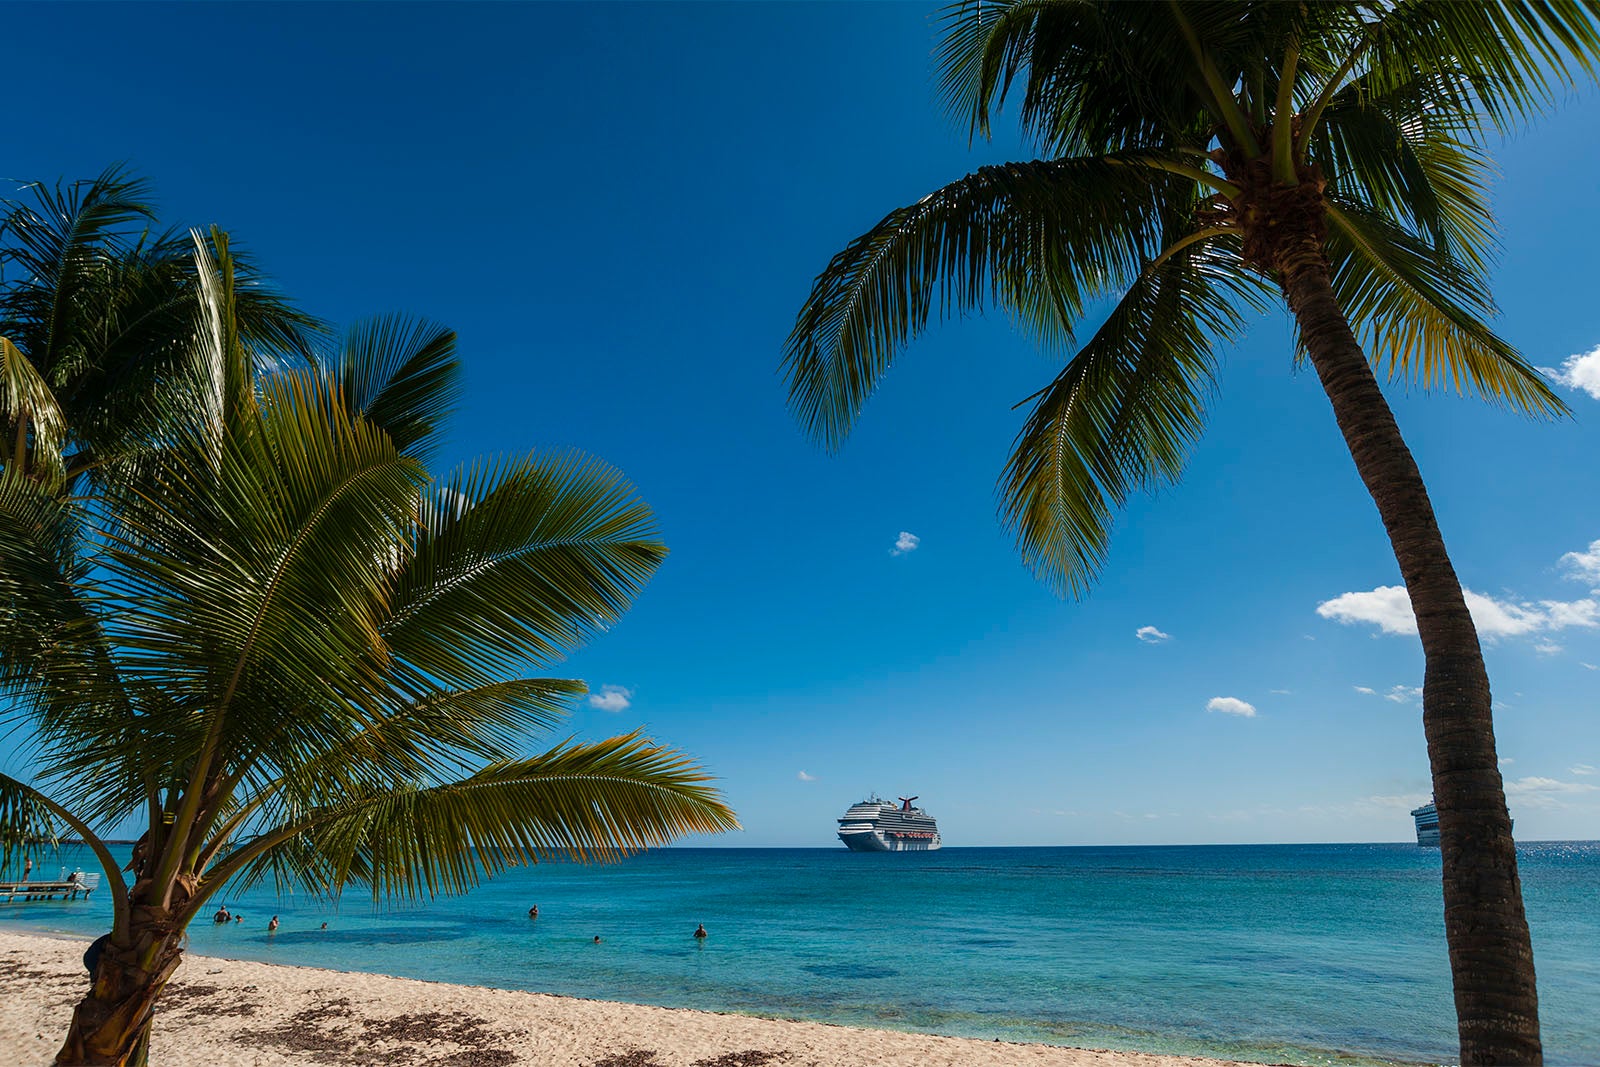 Palm trees on Grand Cayman beach with Carnival cruise ship